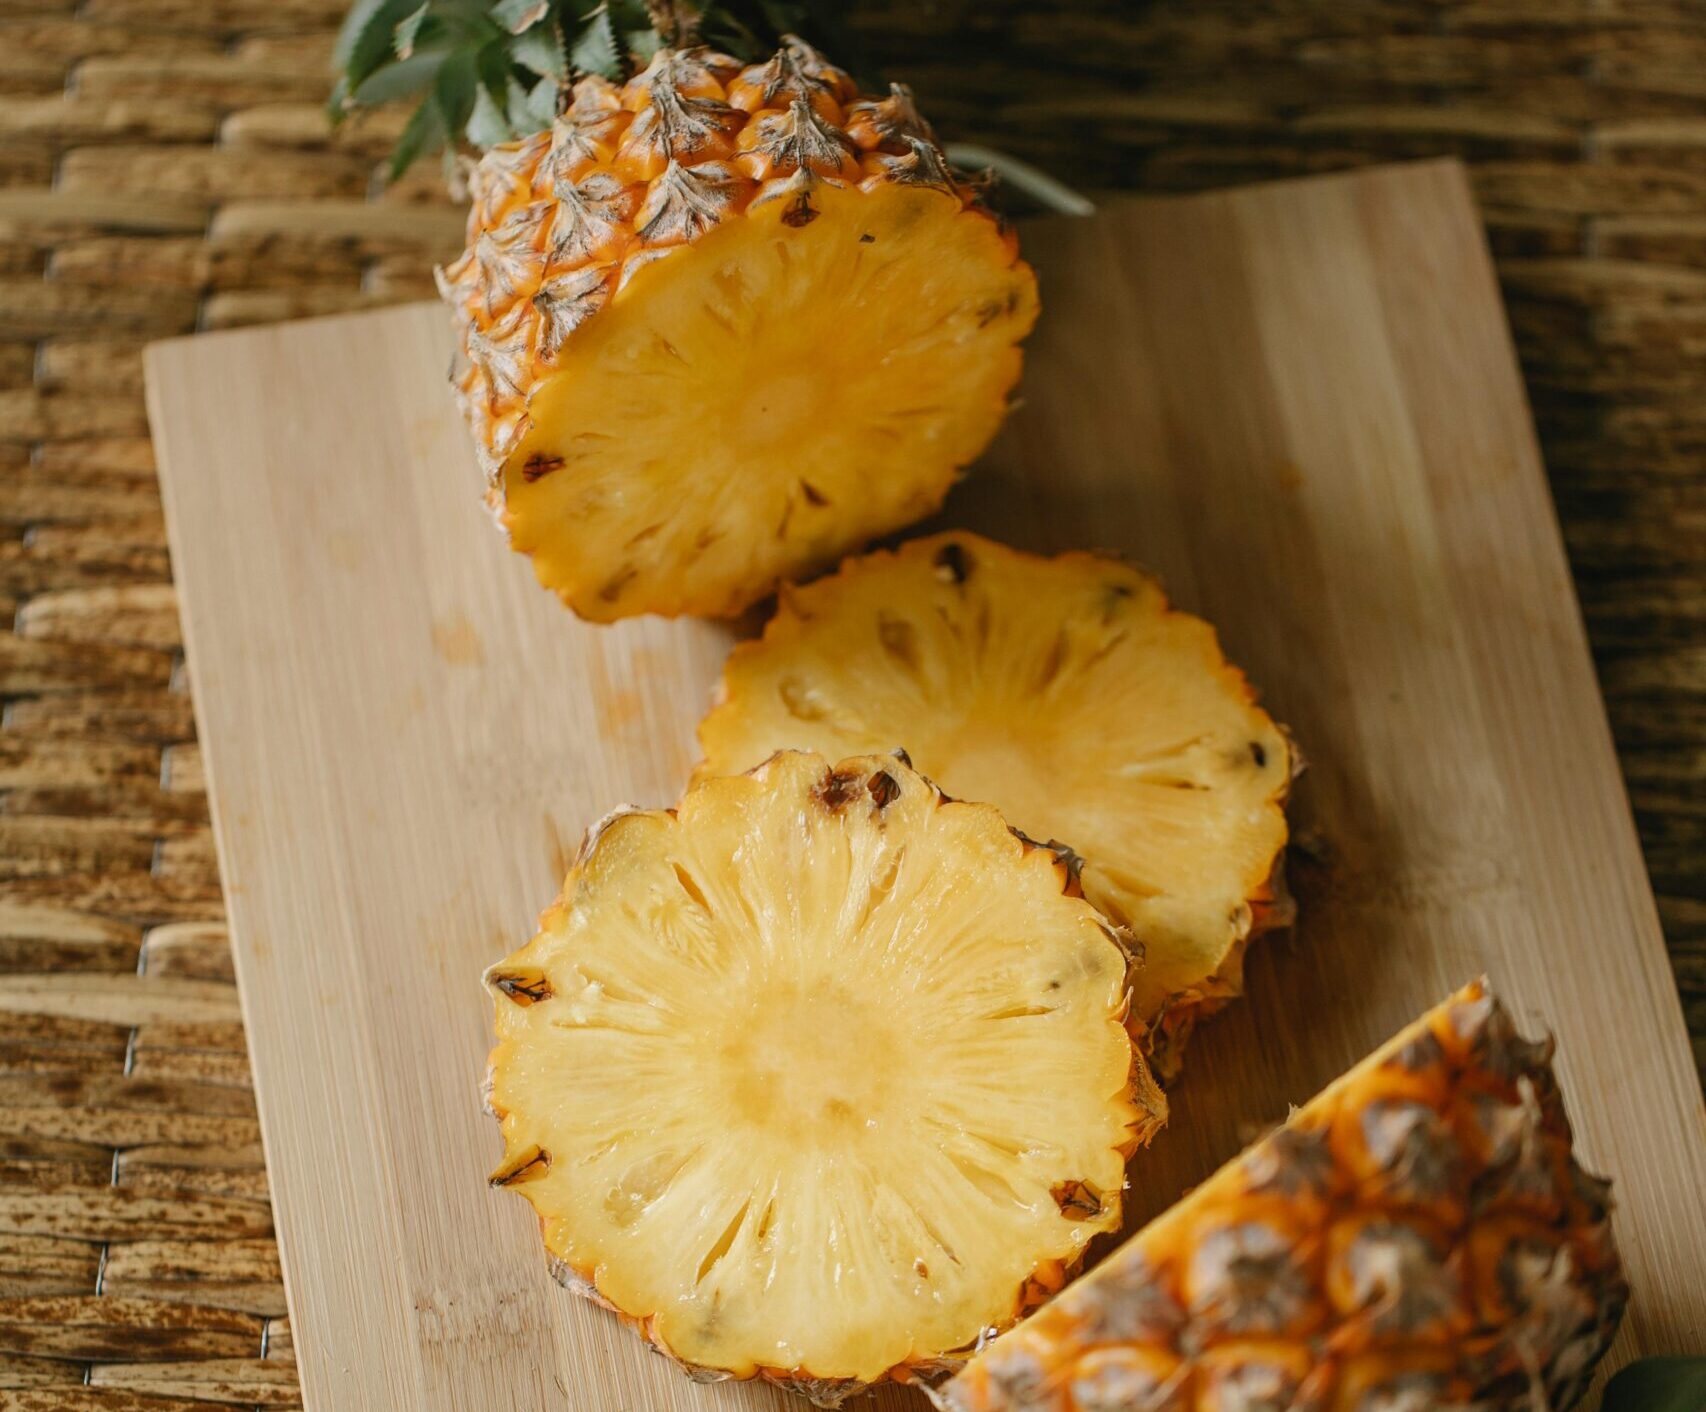 Tired of Pineapple? Try These Foods for Better Intimacy